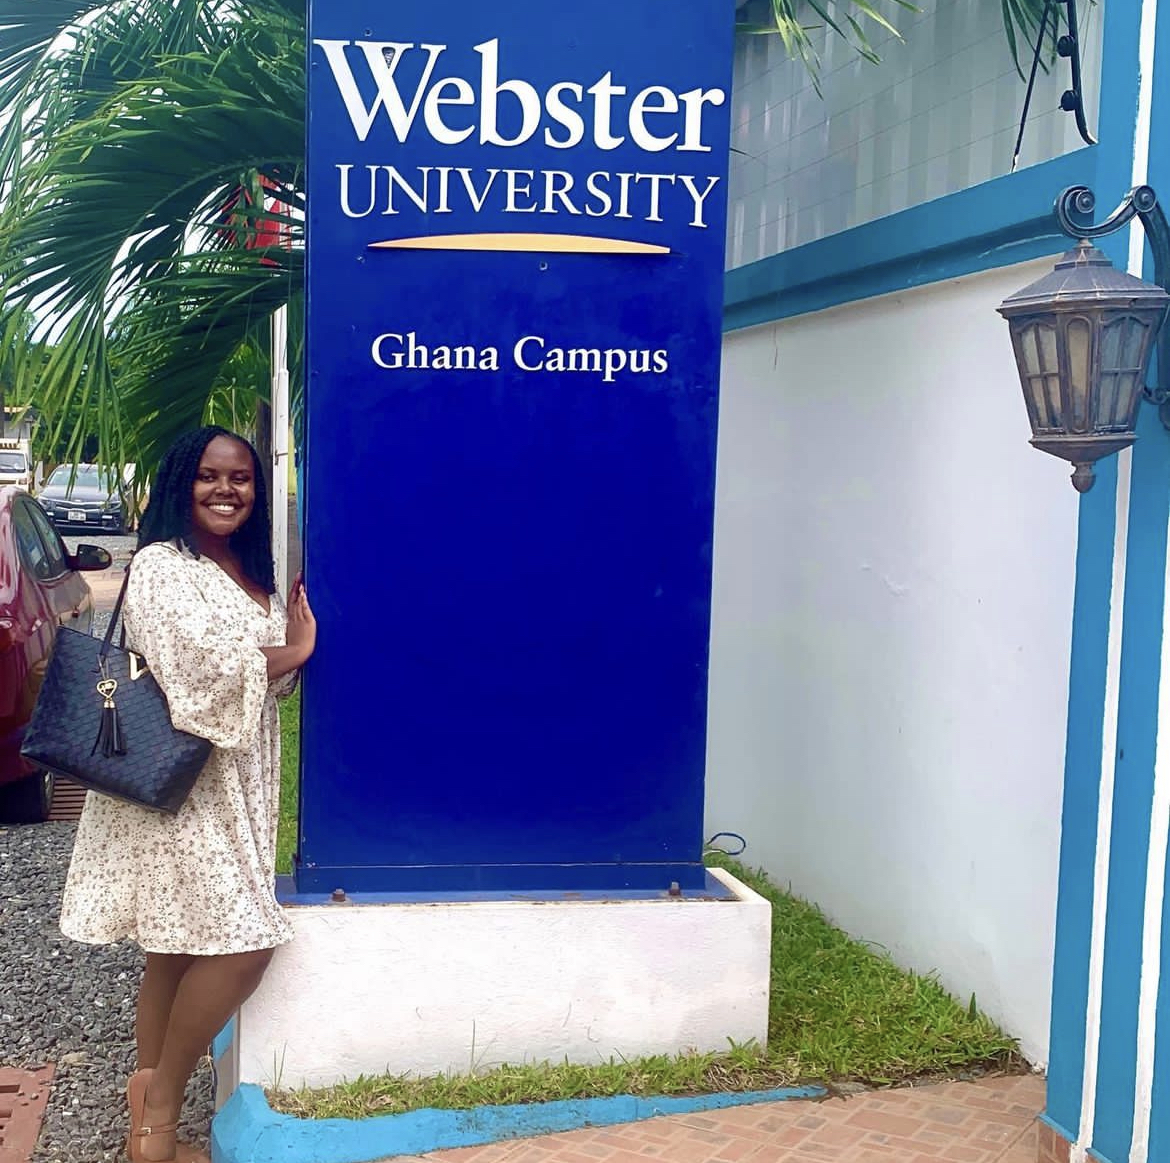 Christina Jane posing in front of the Webster University sign